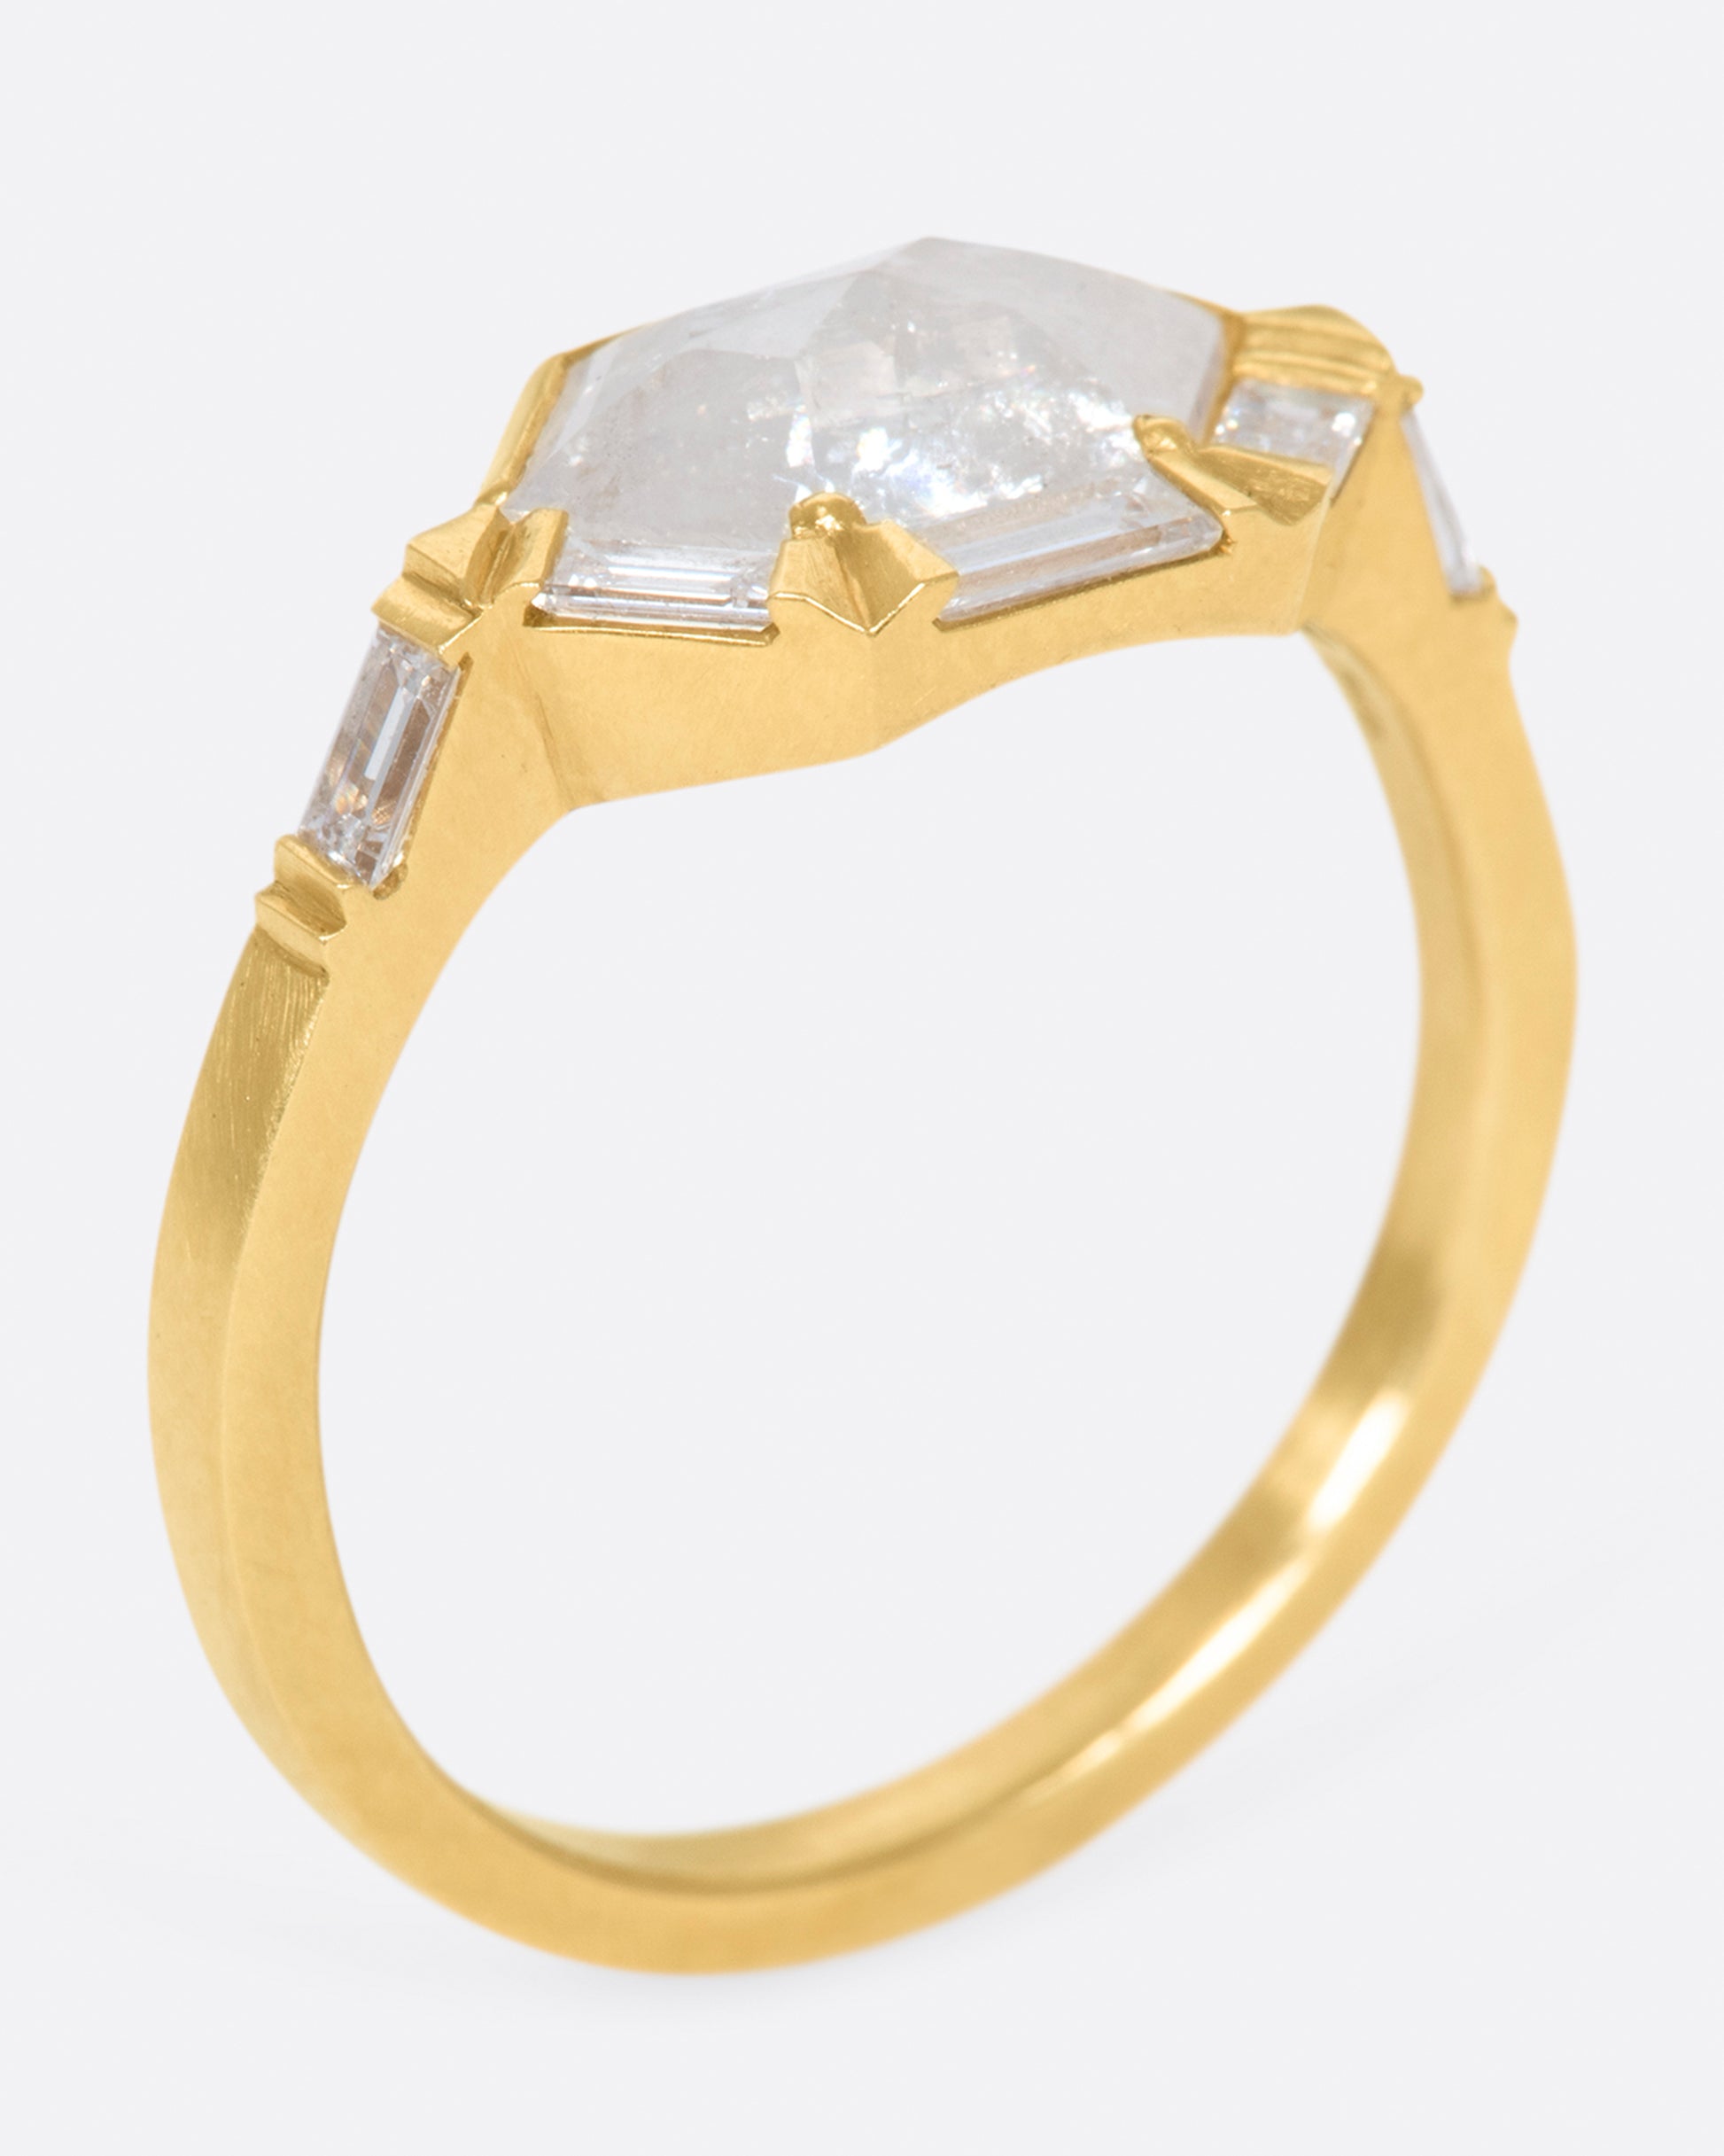 This ring features an east-west set, hexagonal, rose cut gray diamond with a half-halo of baguette diamonds.